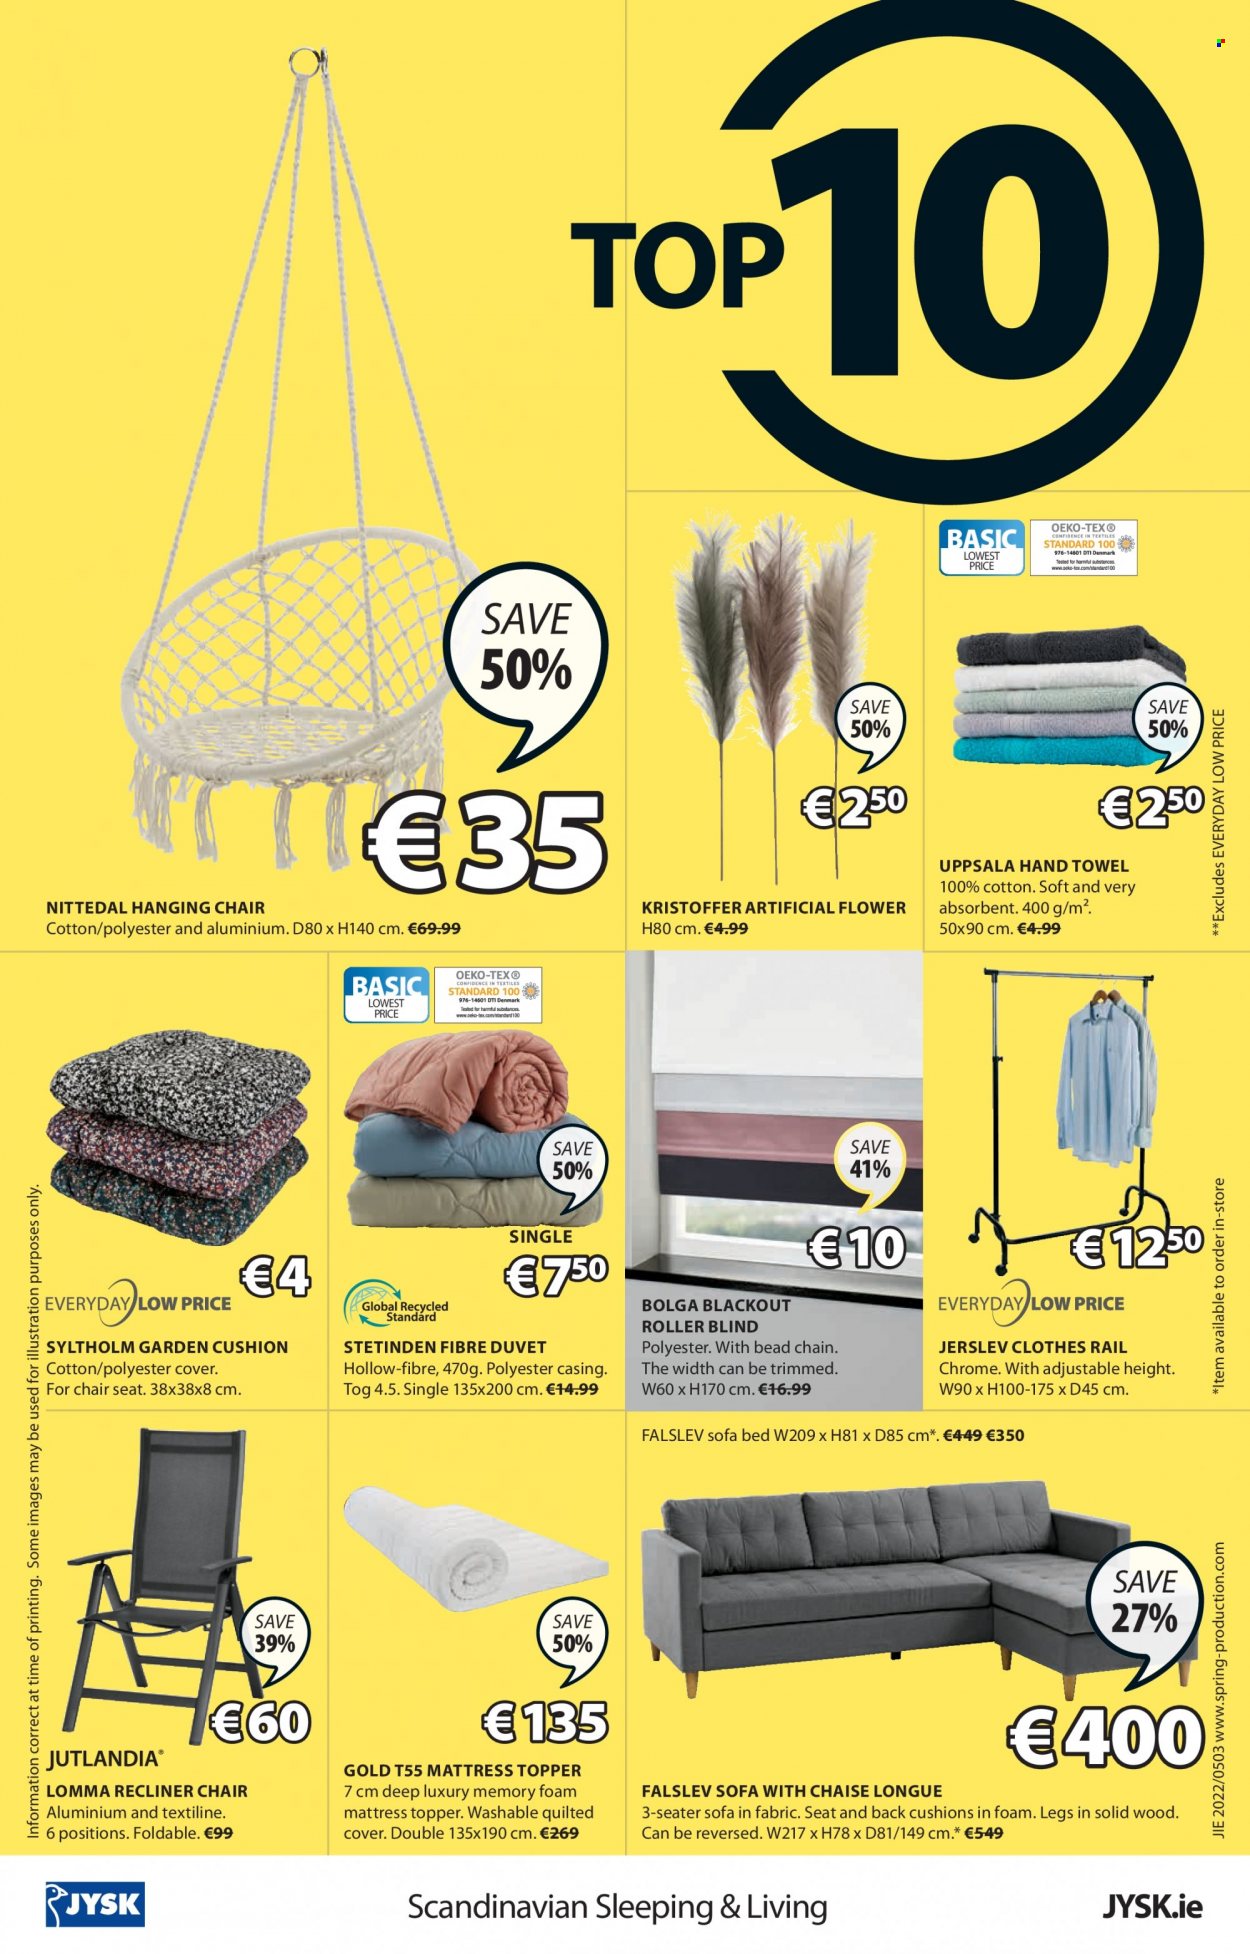 thumbnail - JYSK offer  - 12.05.2022 - 25.05.2022 - Sales products - chair, sofa, sofa bed, recliner chair, sofa with chaise longue, chaise longue, bed, mattress protector, foam mattress, clothes rail, cushion, artificial flowers, duvet, topper, towel, hand towel, blackout. Page 16.